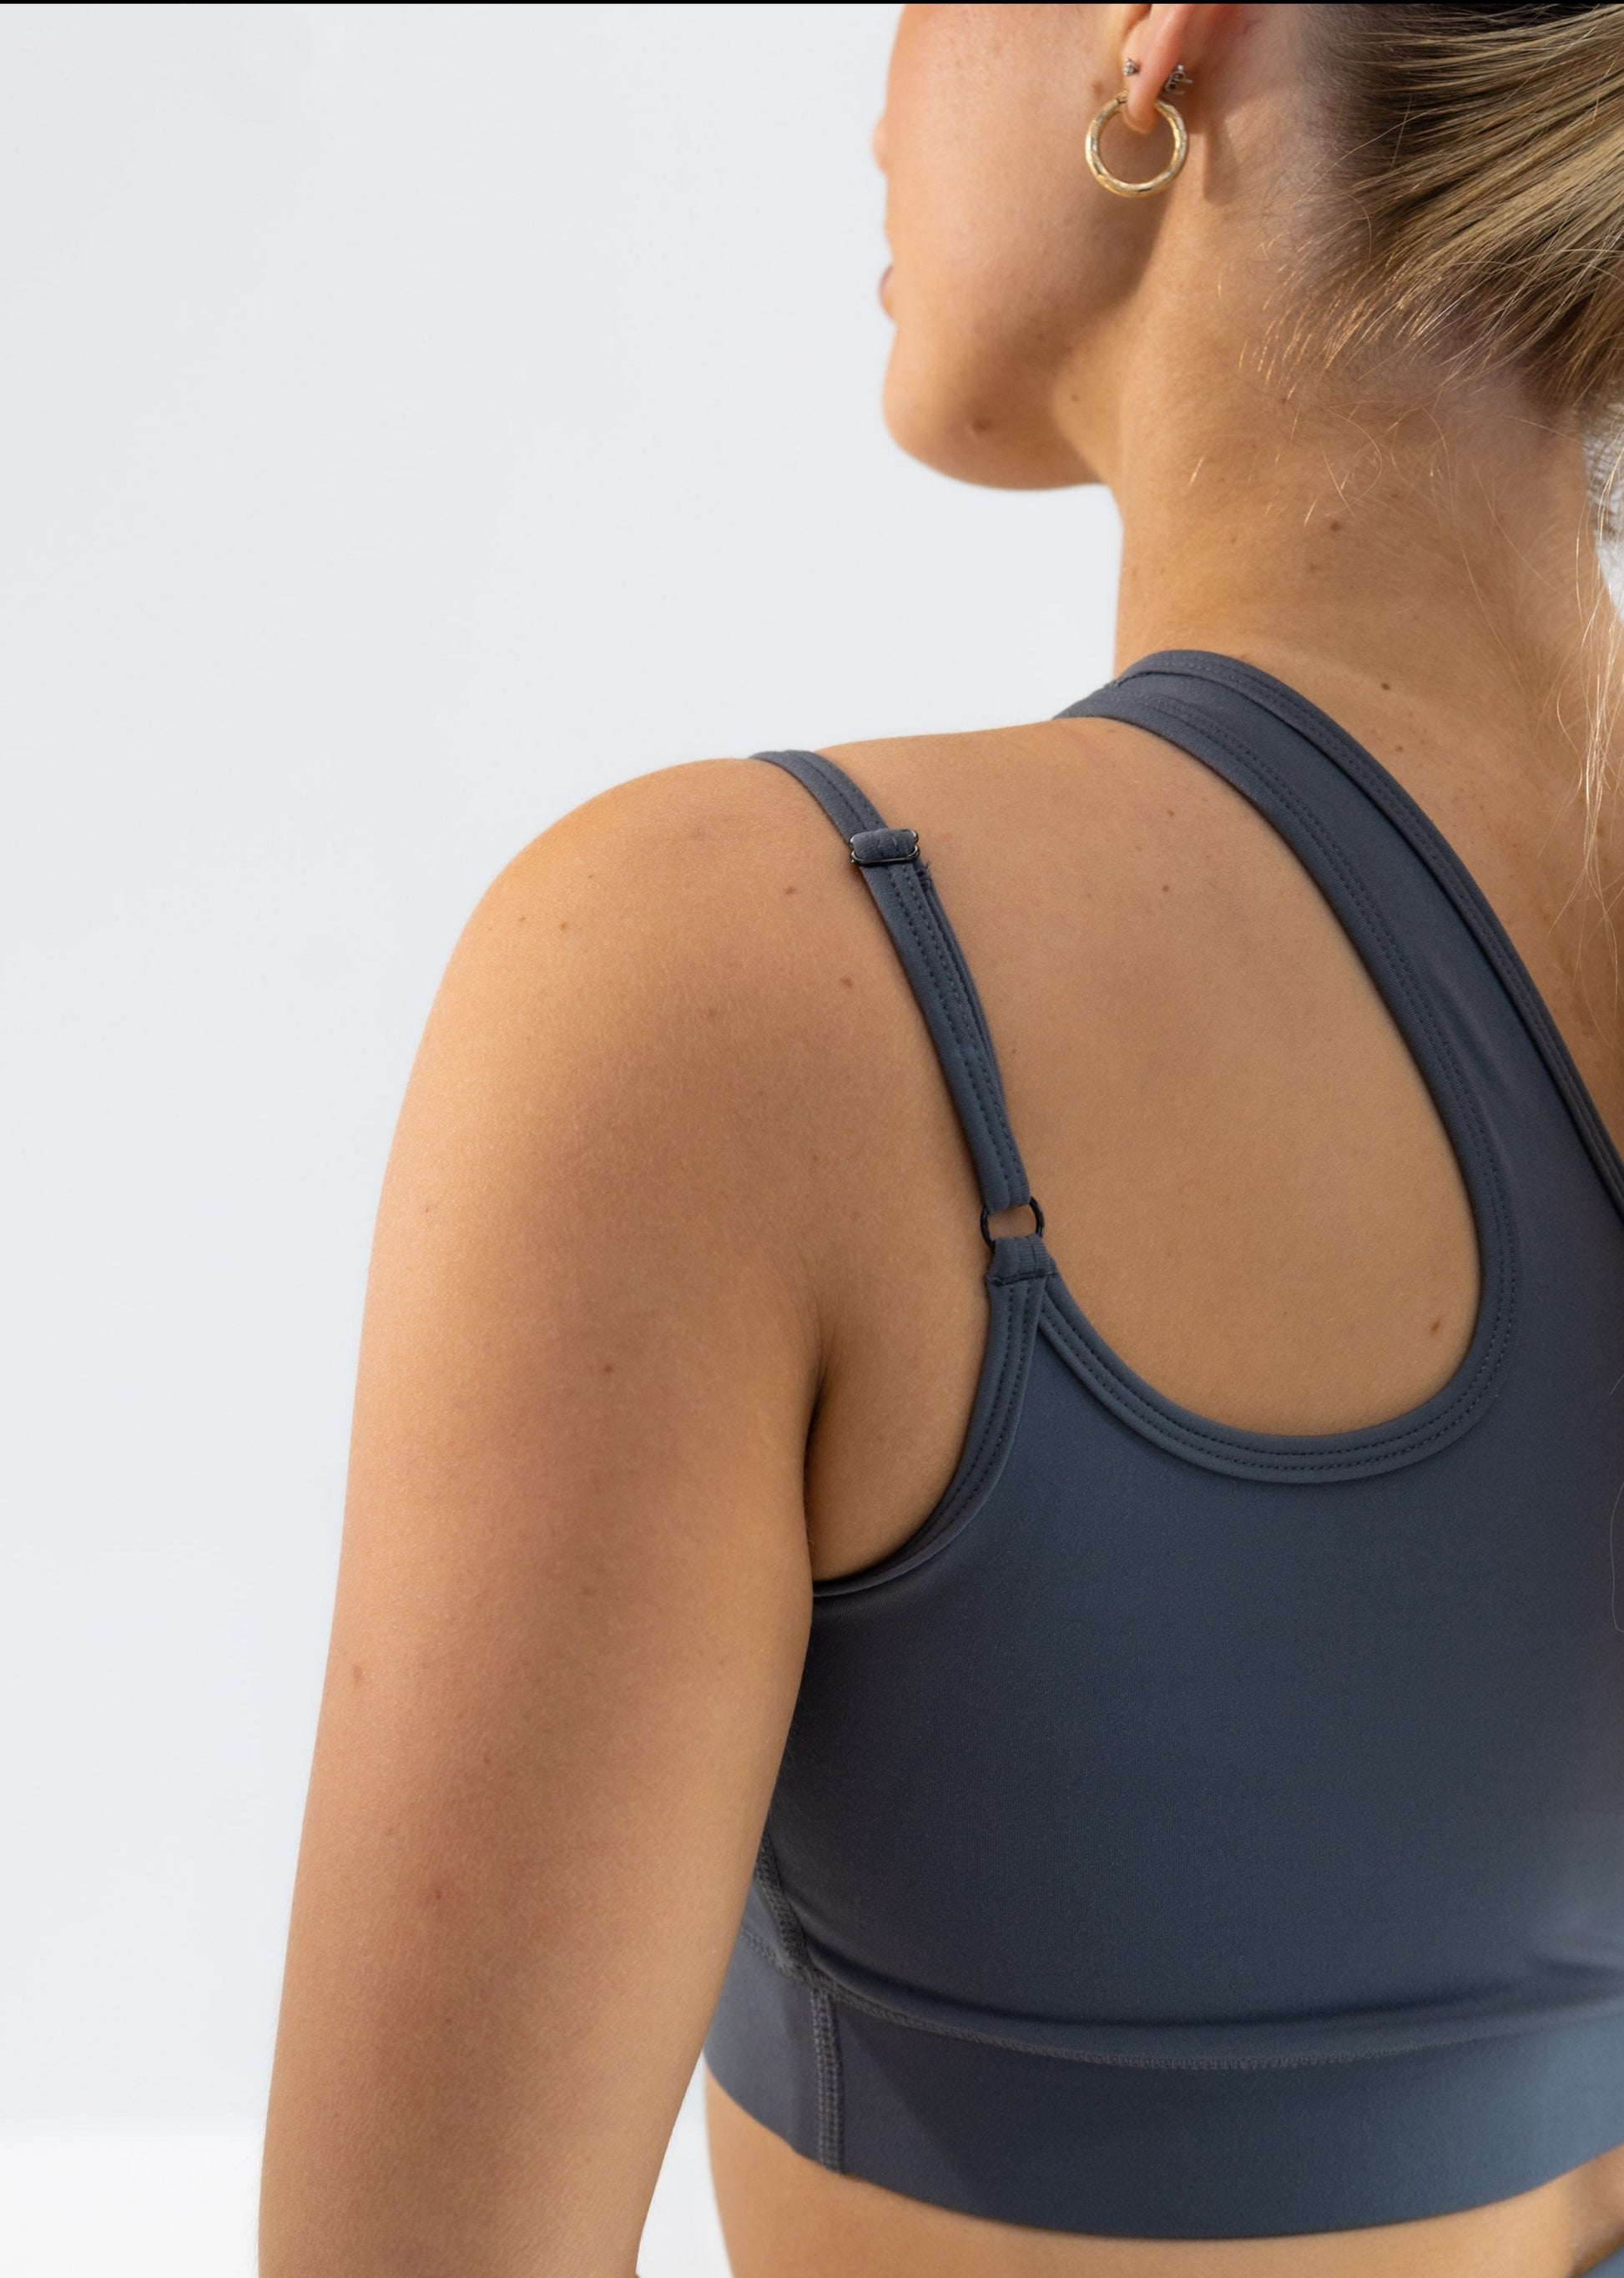 Storm in a D-cup -- UK launches sports bra probe